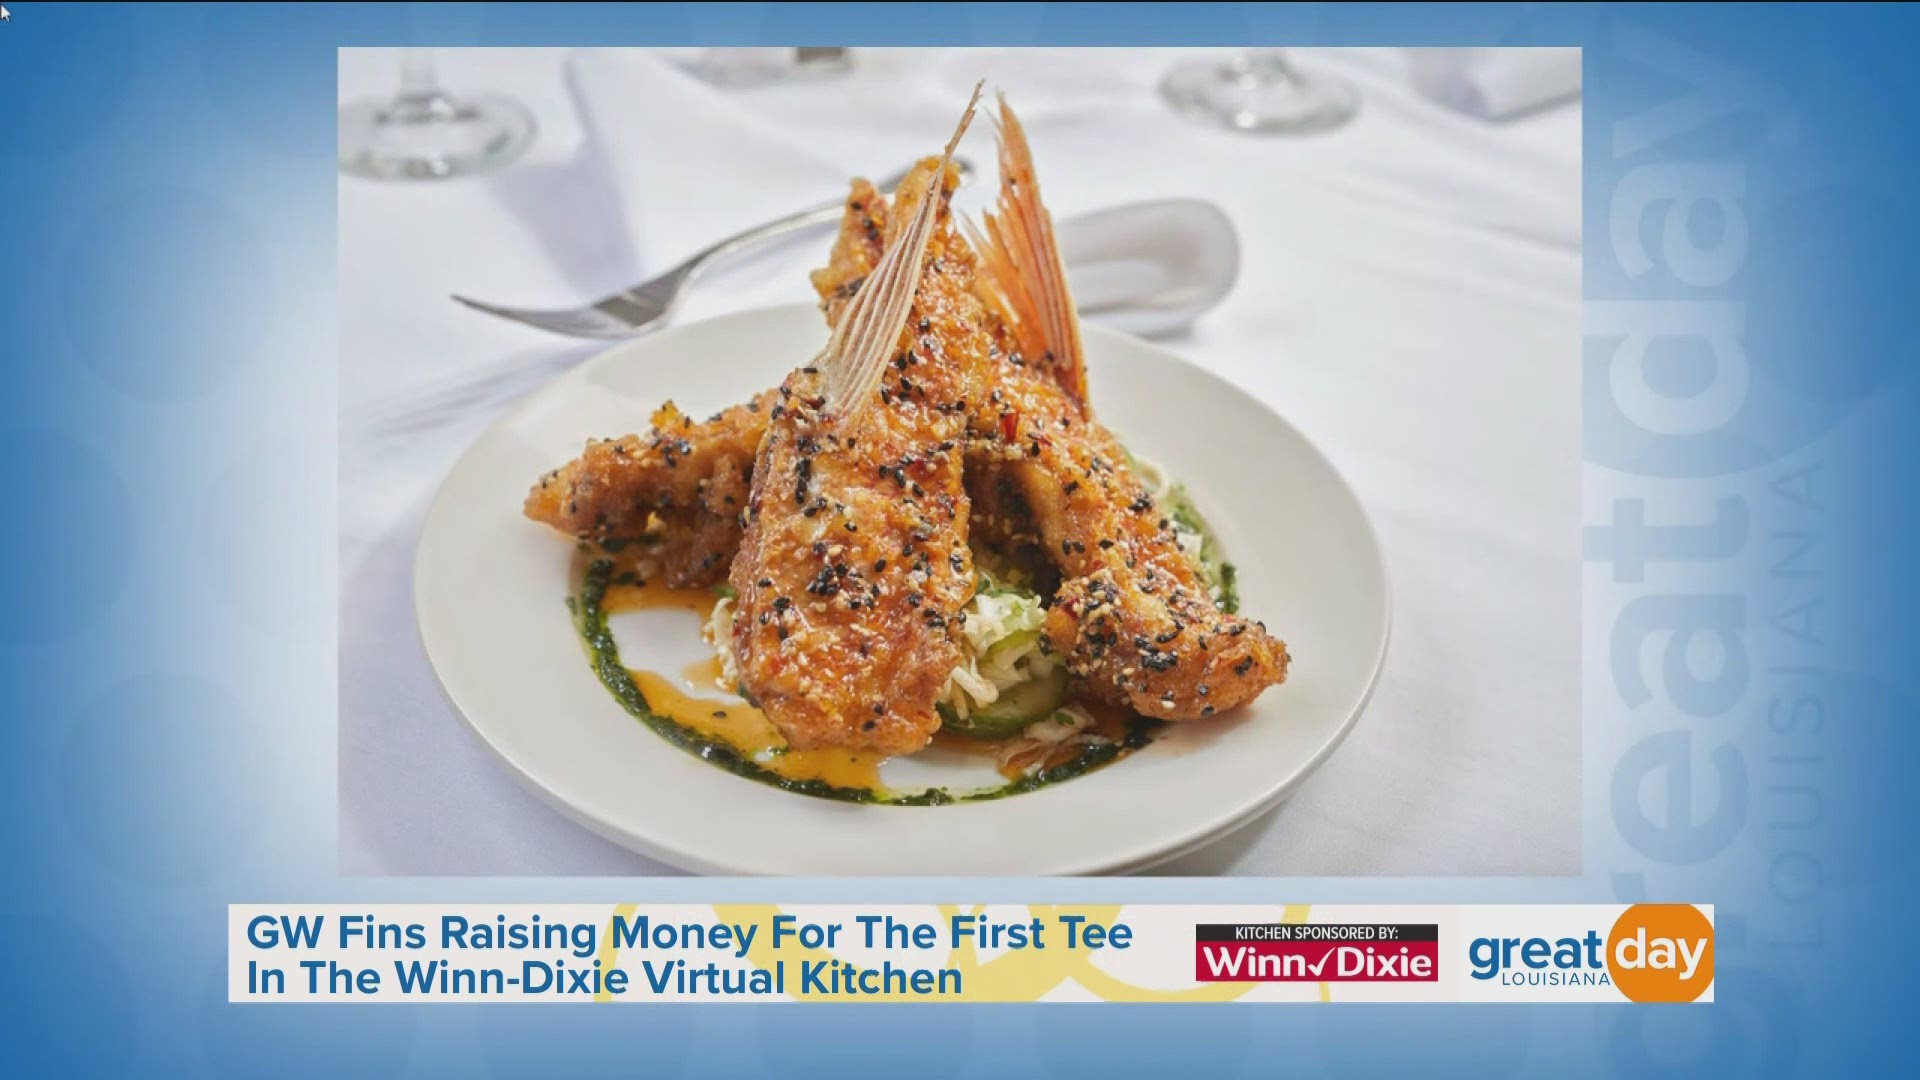 The executive chef of GW Fins shared a recipe for fins wings. The executive director of First Tee Greater New Orleans also discussed their fundraising partnership.